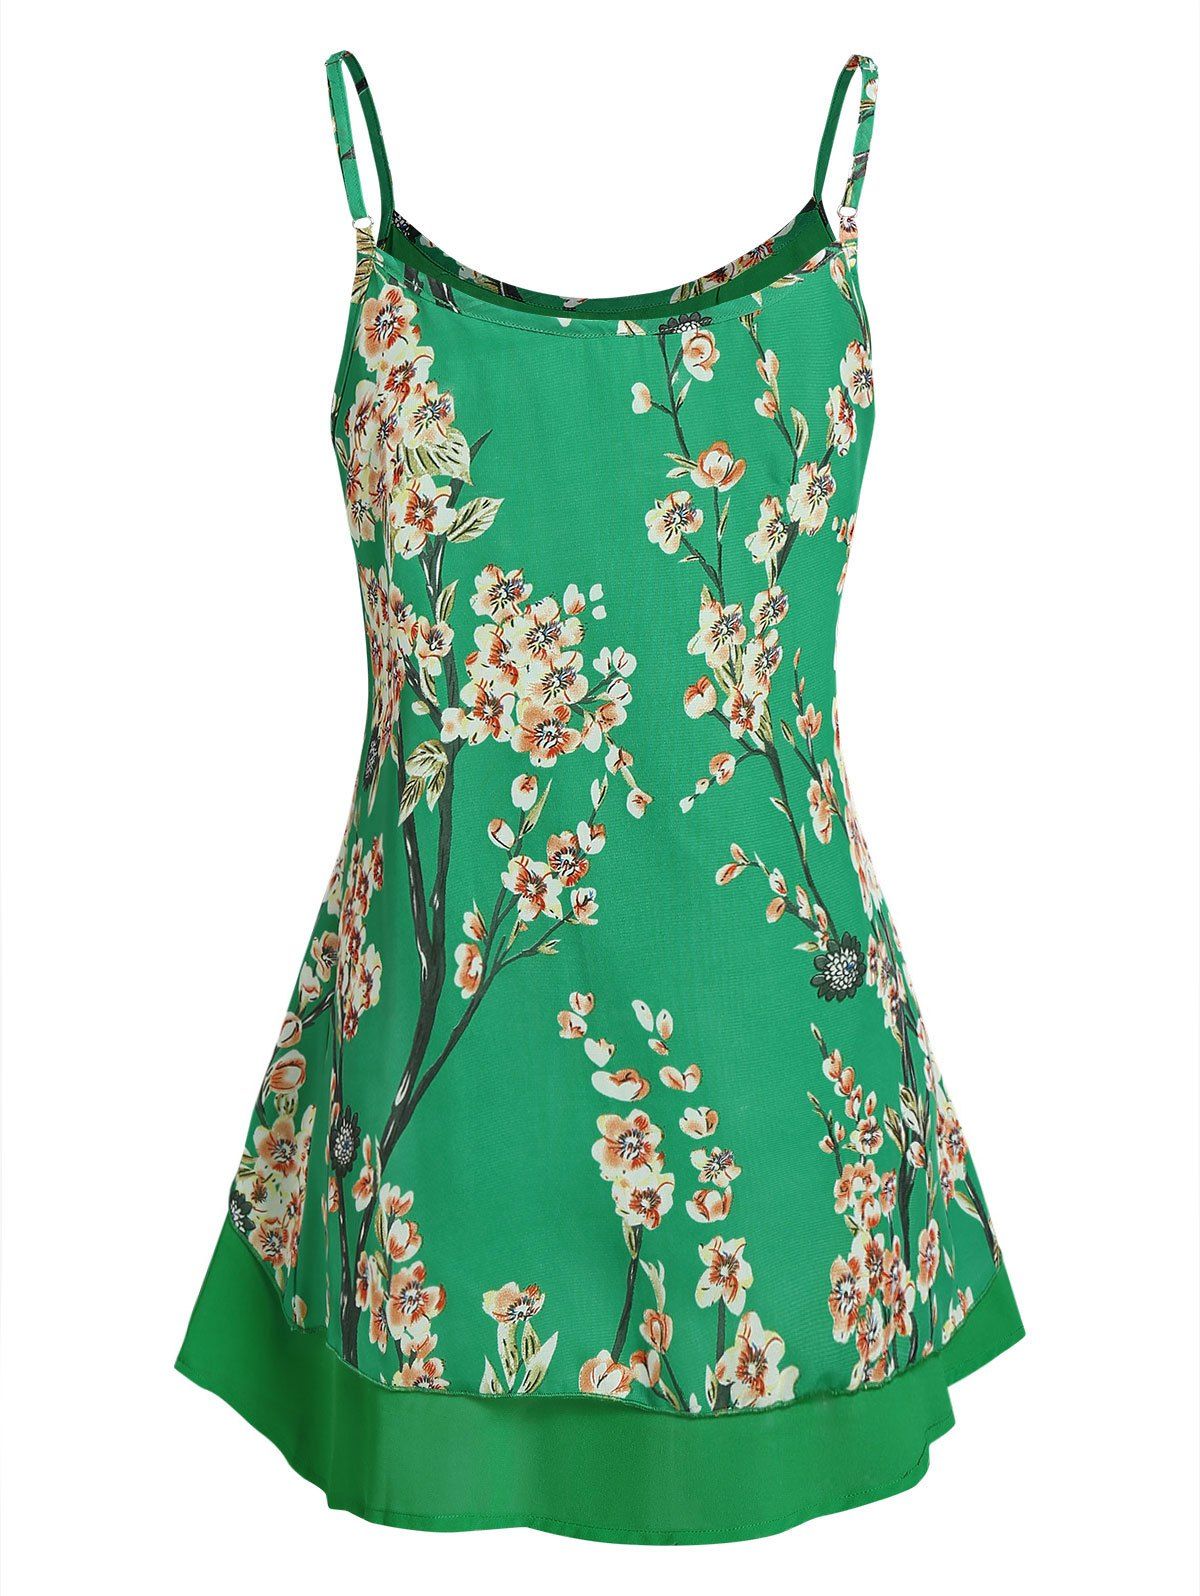 [55% OFF] 2021 Floral Print Chiffon Cami Top In CLOVER GREEN | DressLily